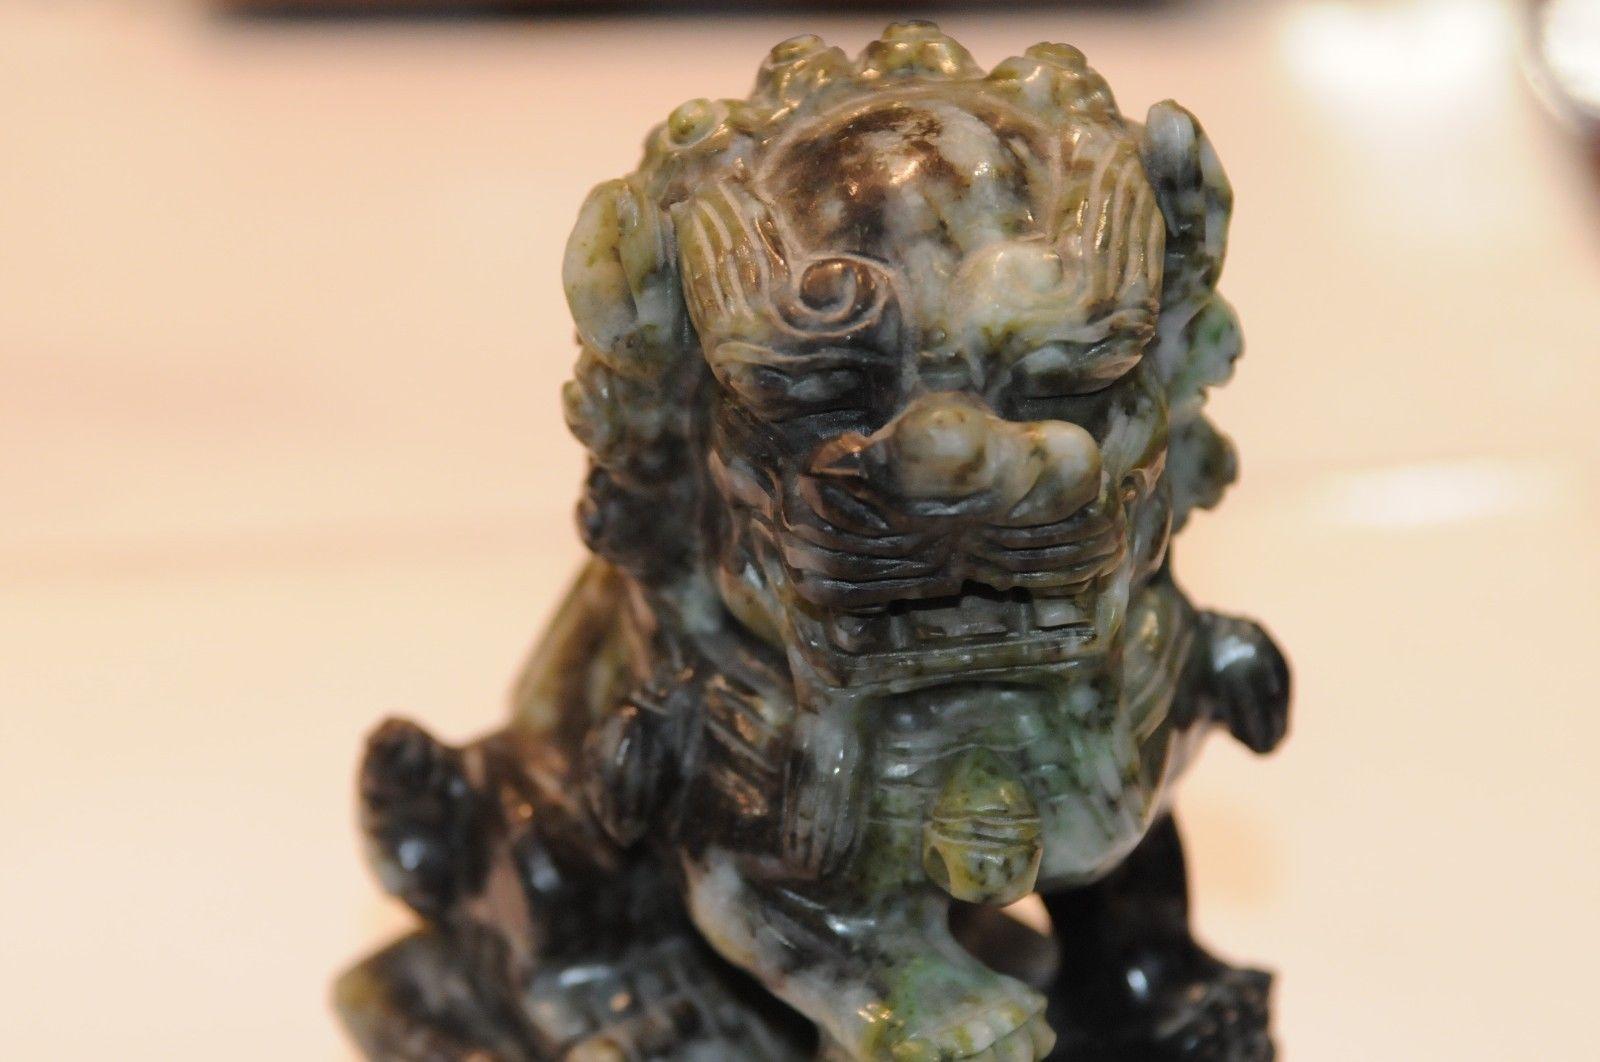 Heavy and very nice Jade Lion
China around 1910
Good condition! See the detailed images!
(One small part of an edge of the stand is not quite complete)
Height ca. 15 cm
